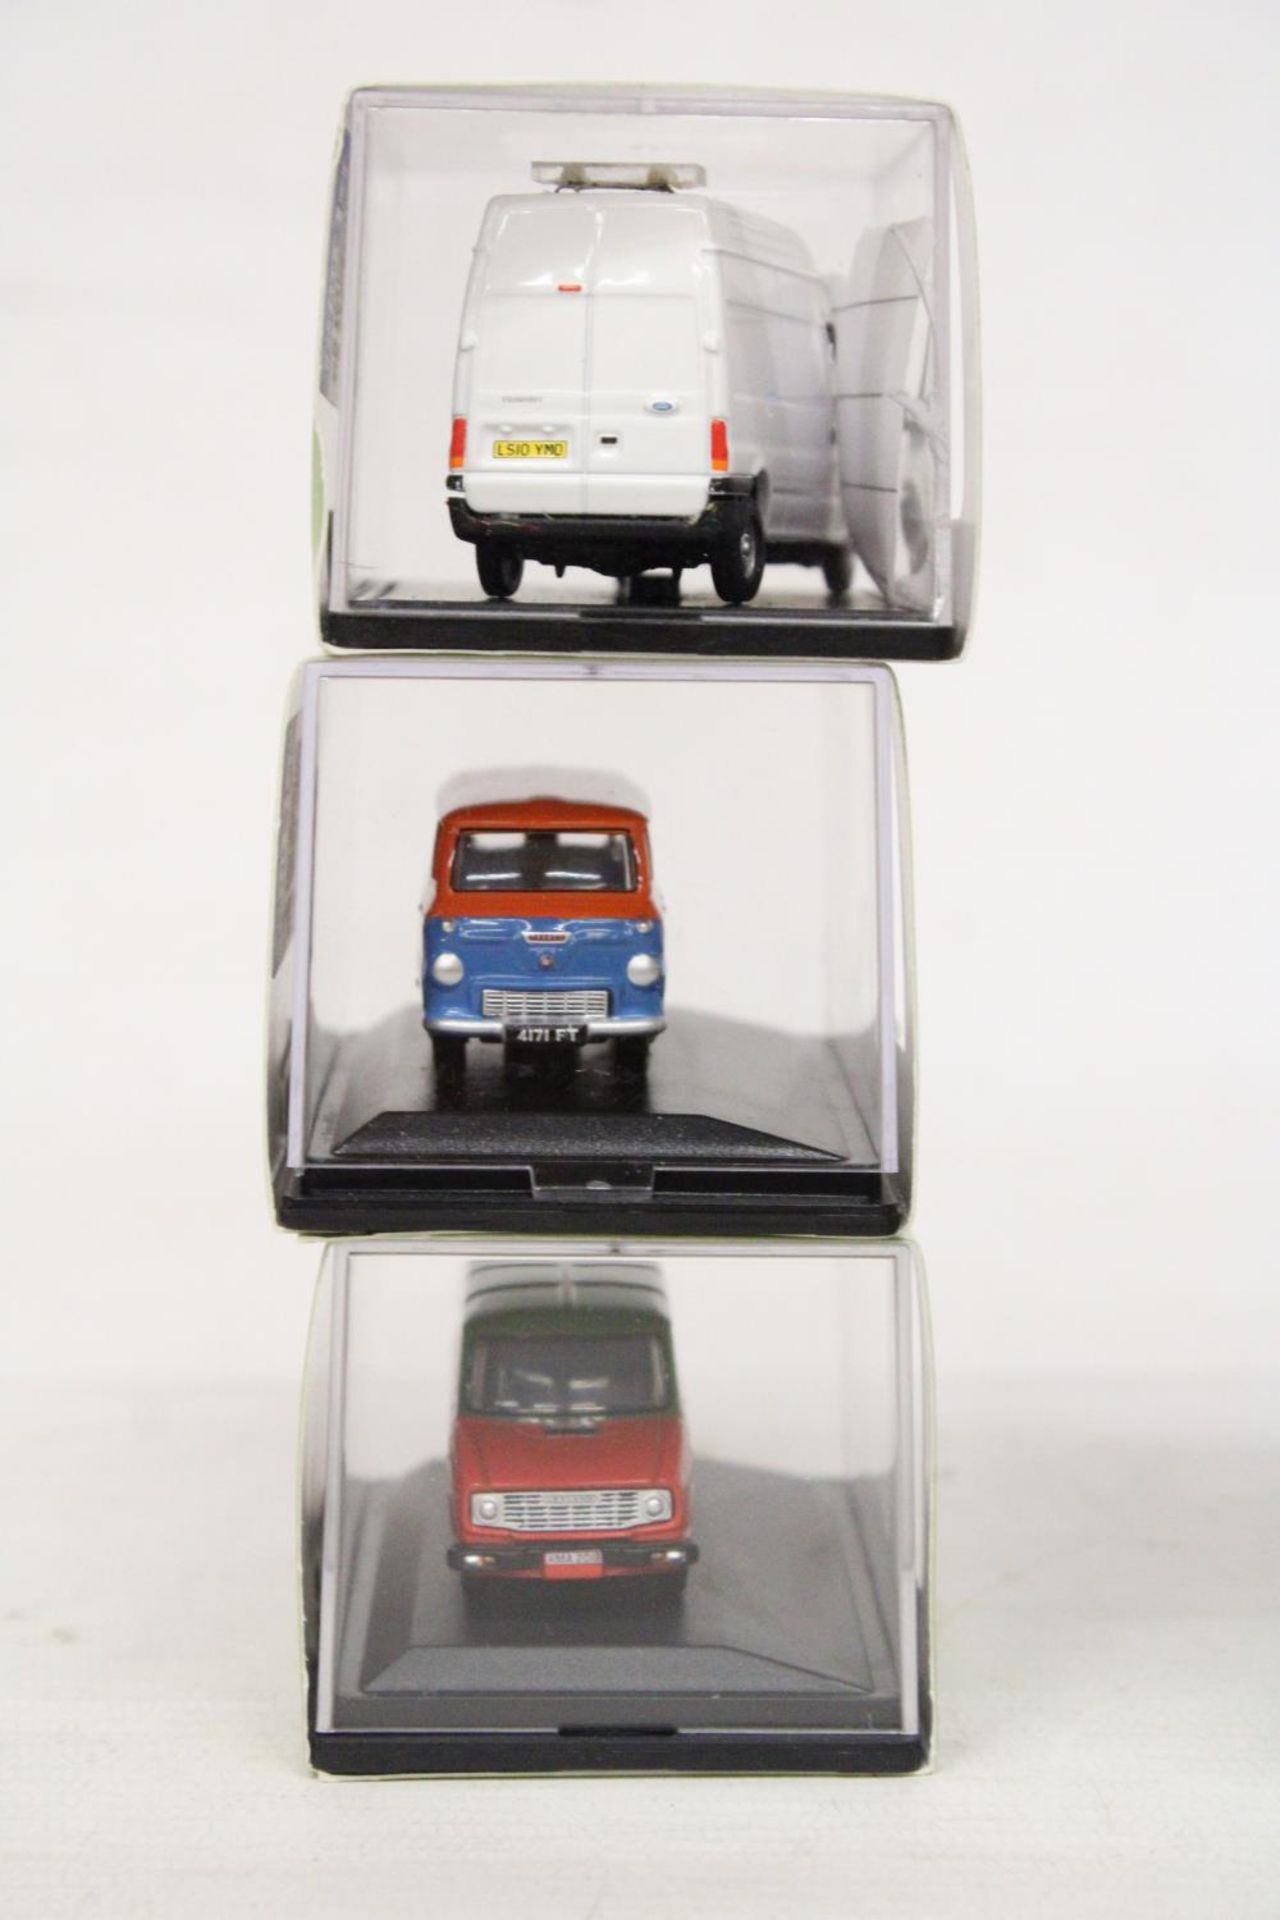 SIX AS NEW AND BOXED OXFORD COMMERCIAL VEHICLES - Image 5 of 7